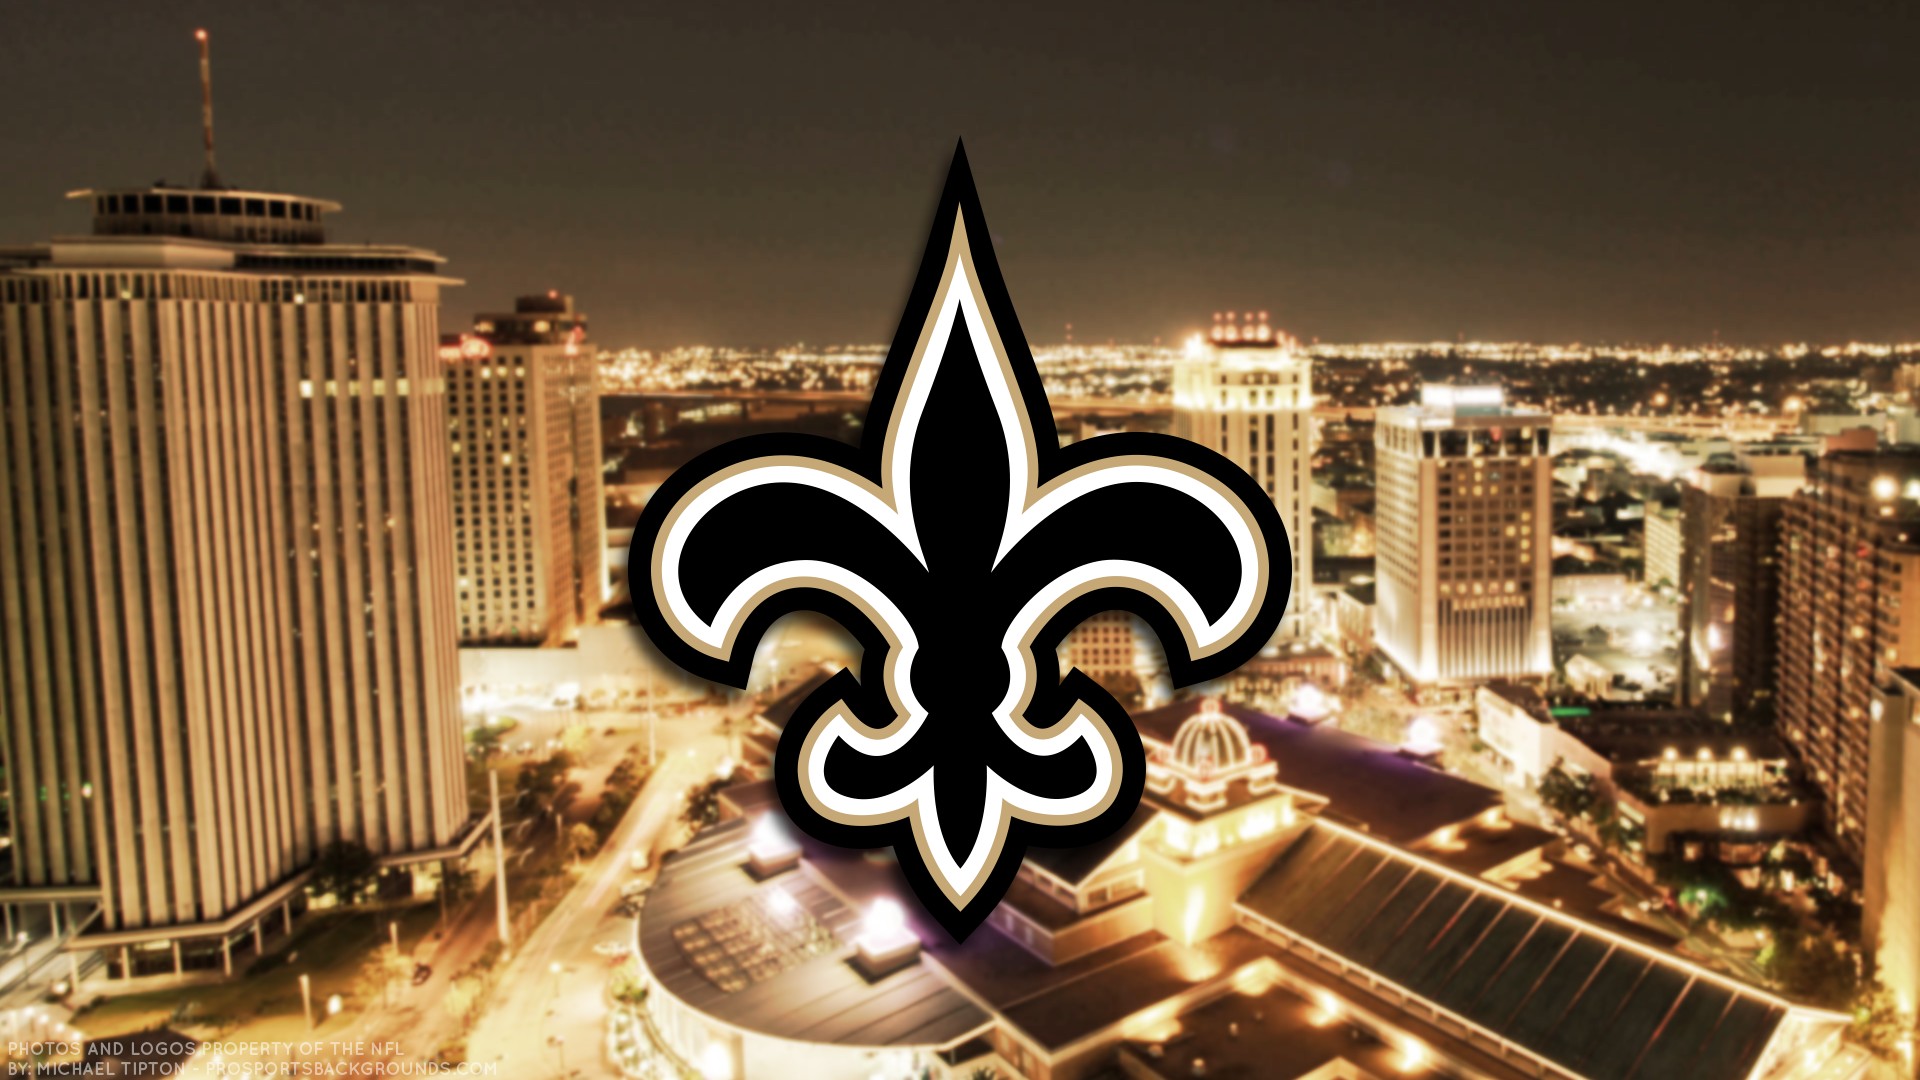 Wallpapers HD New Orleans Saints with resolution 1920x1080 pixel. You can make this wallpaper for your Mac or Windows Desktop Background, iPhone, Android or Tablet and another Smartphone device